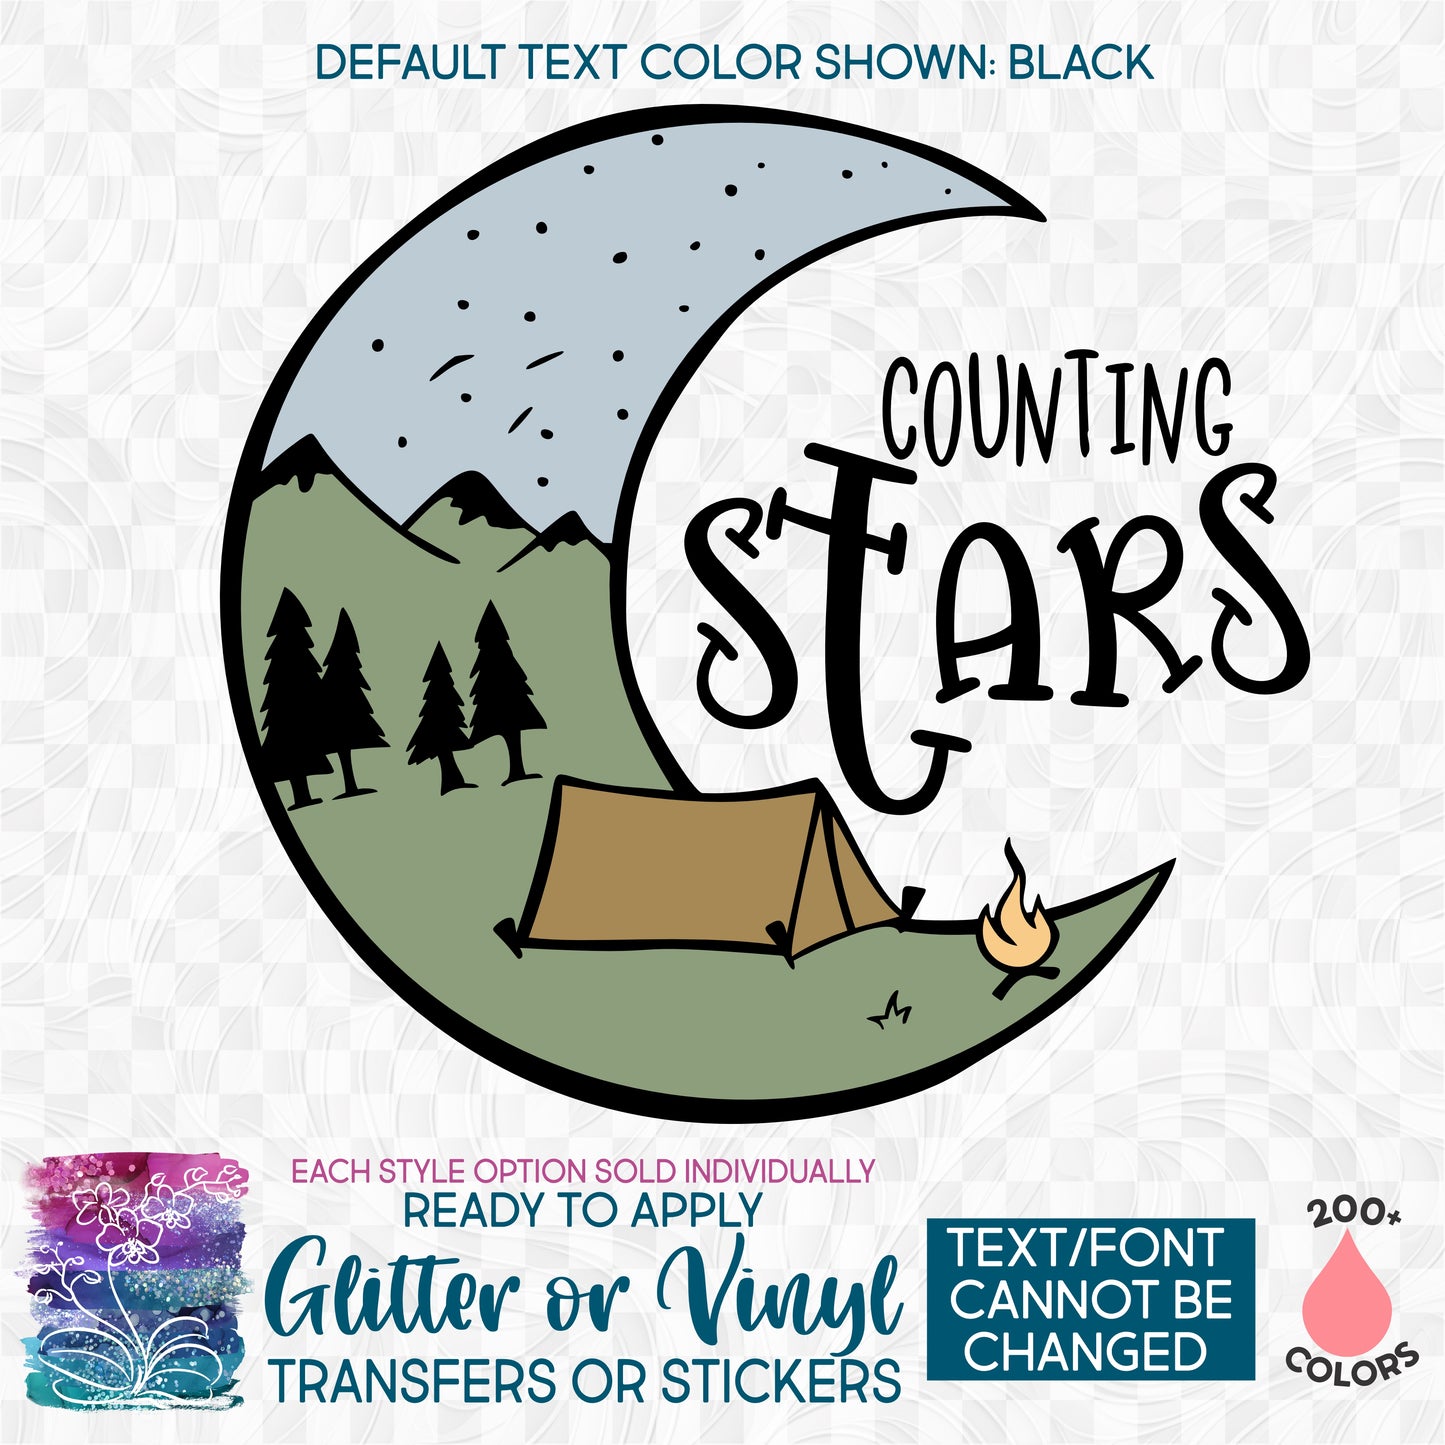 (s228-4S) Counting Stars Crescent Moon Camping Outdoors Glitter or Vinyl Iron-On Transfer or Sticker